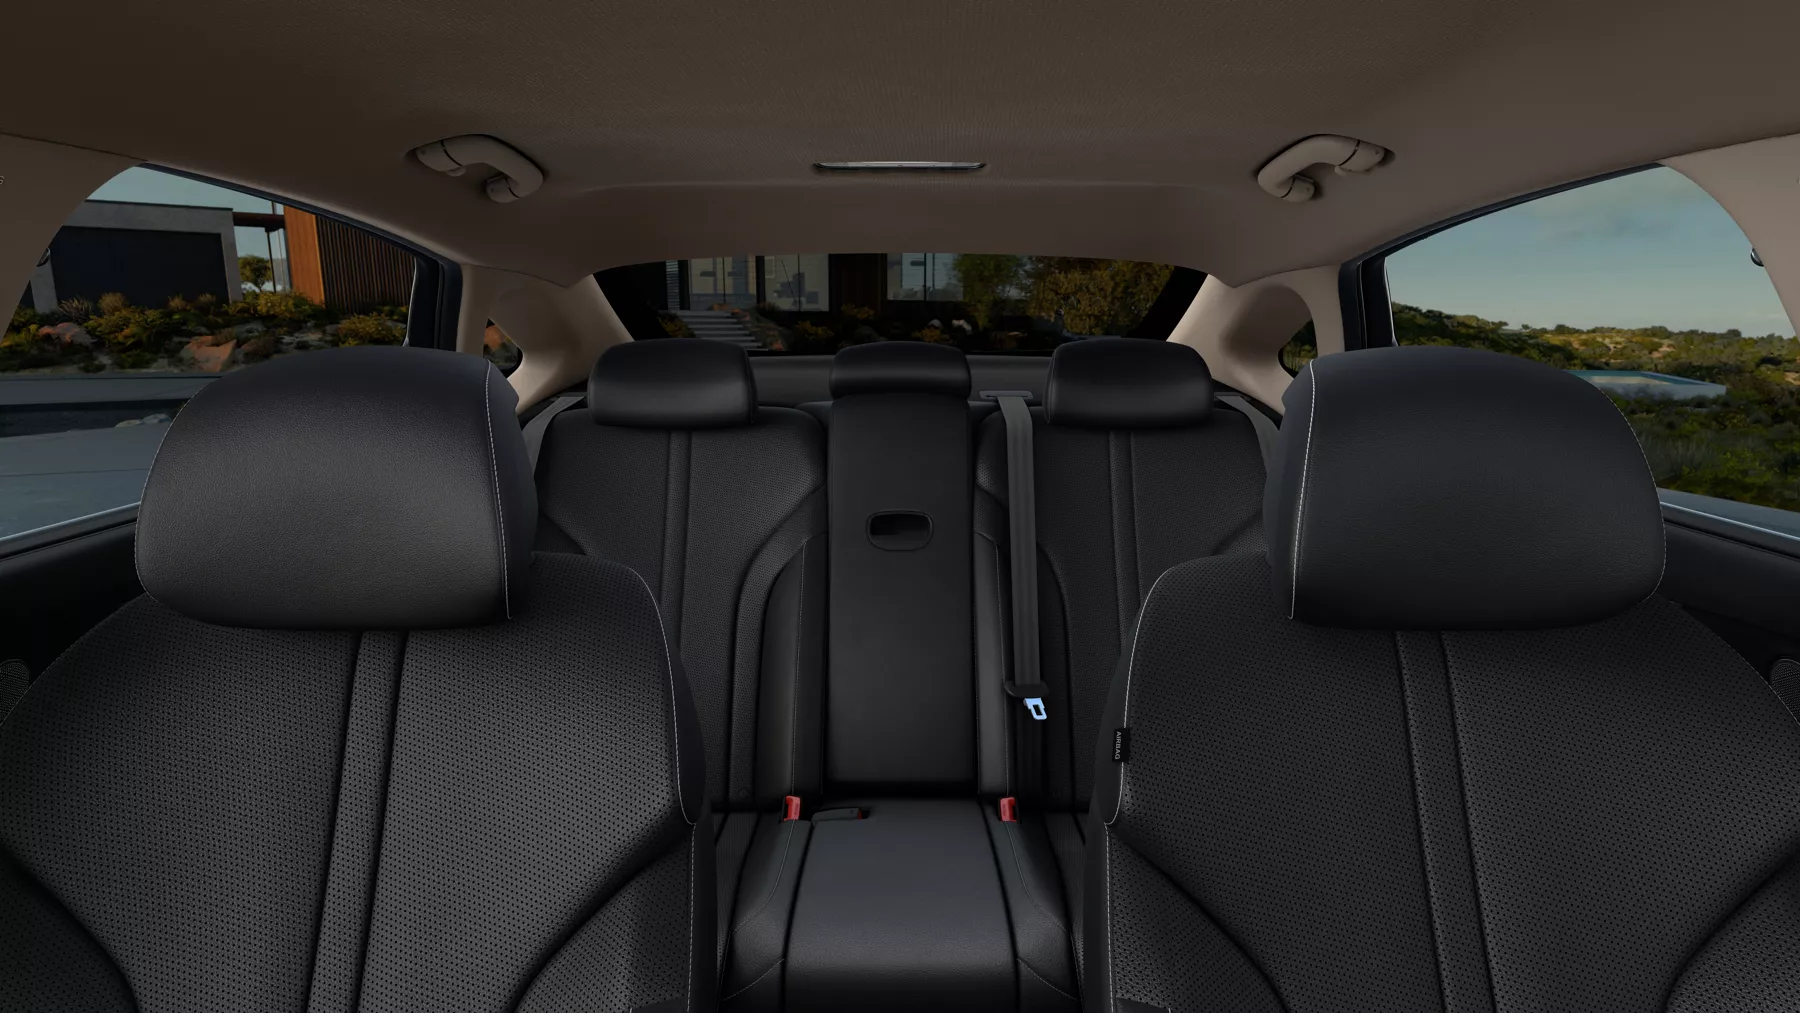 G80 front and rear seats in black color.